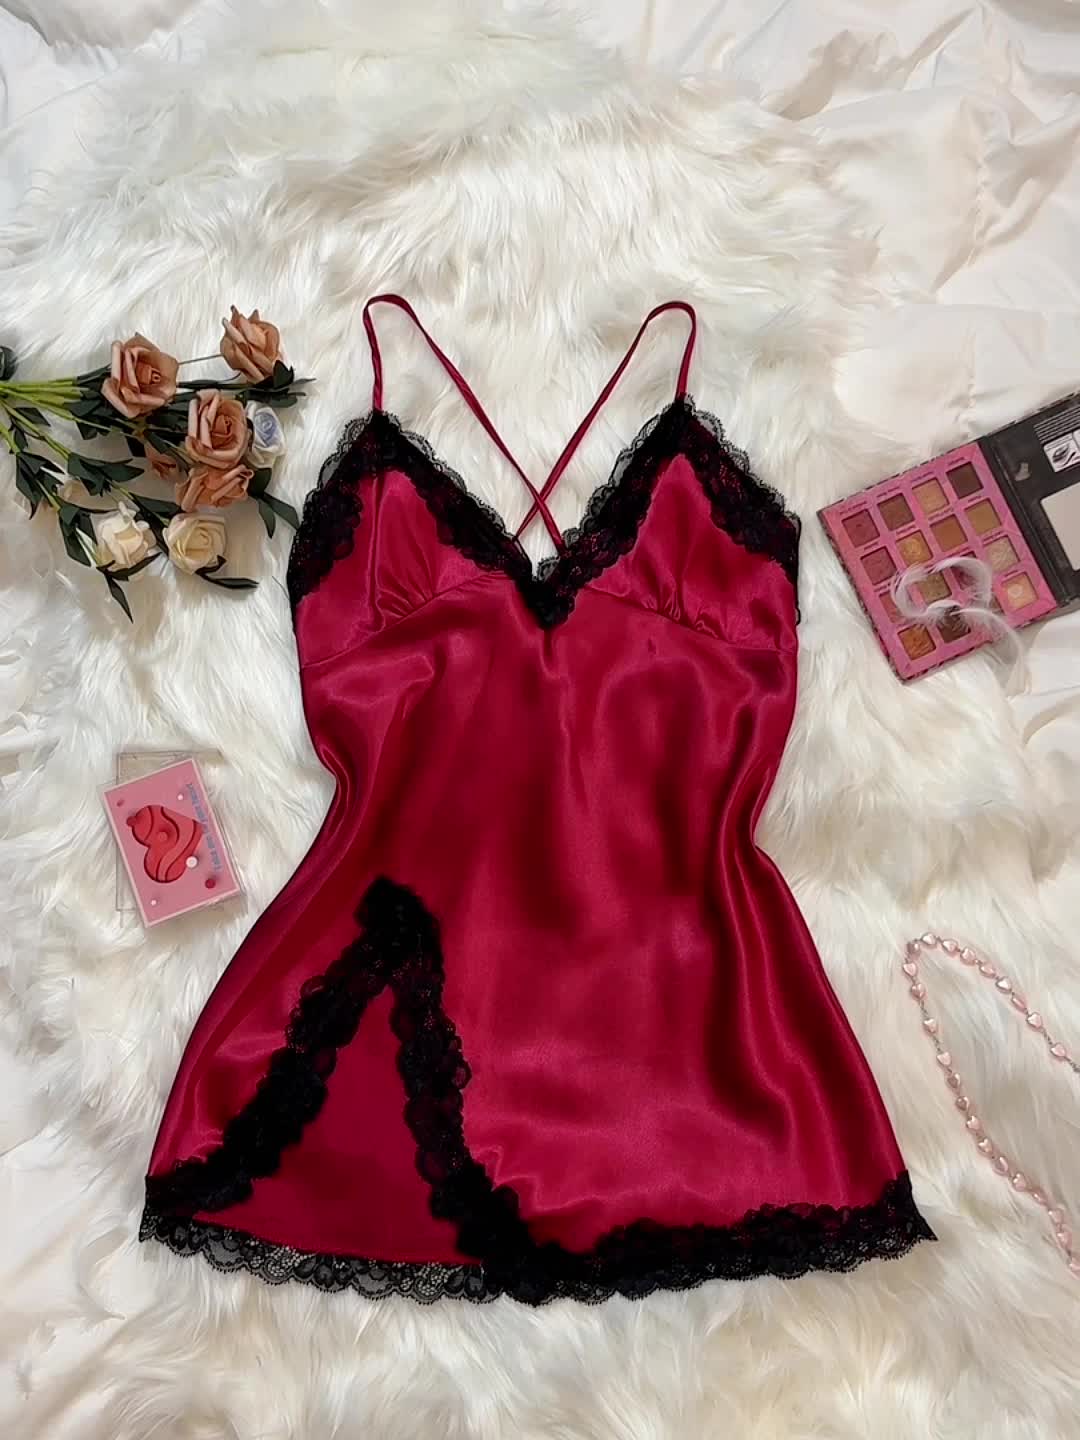 Sexy Lingerie Sexy Sleeping Cloth Lace Dress – FUSSYSHOP